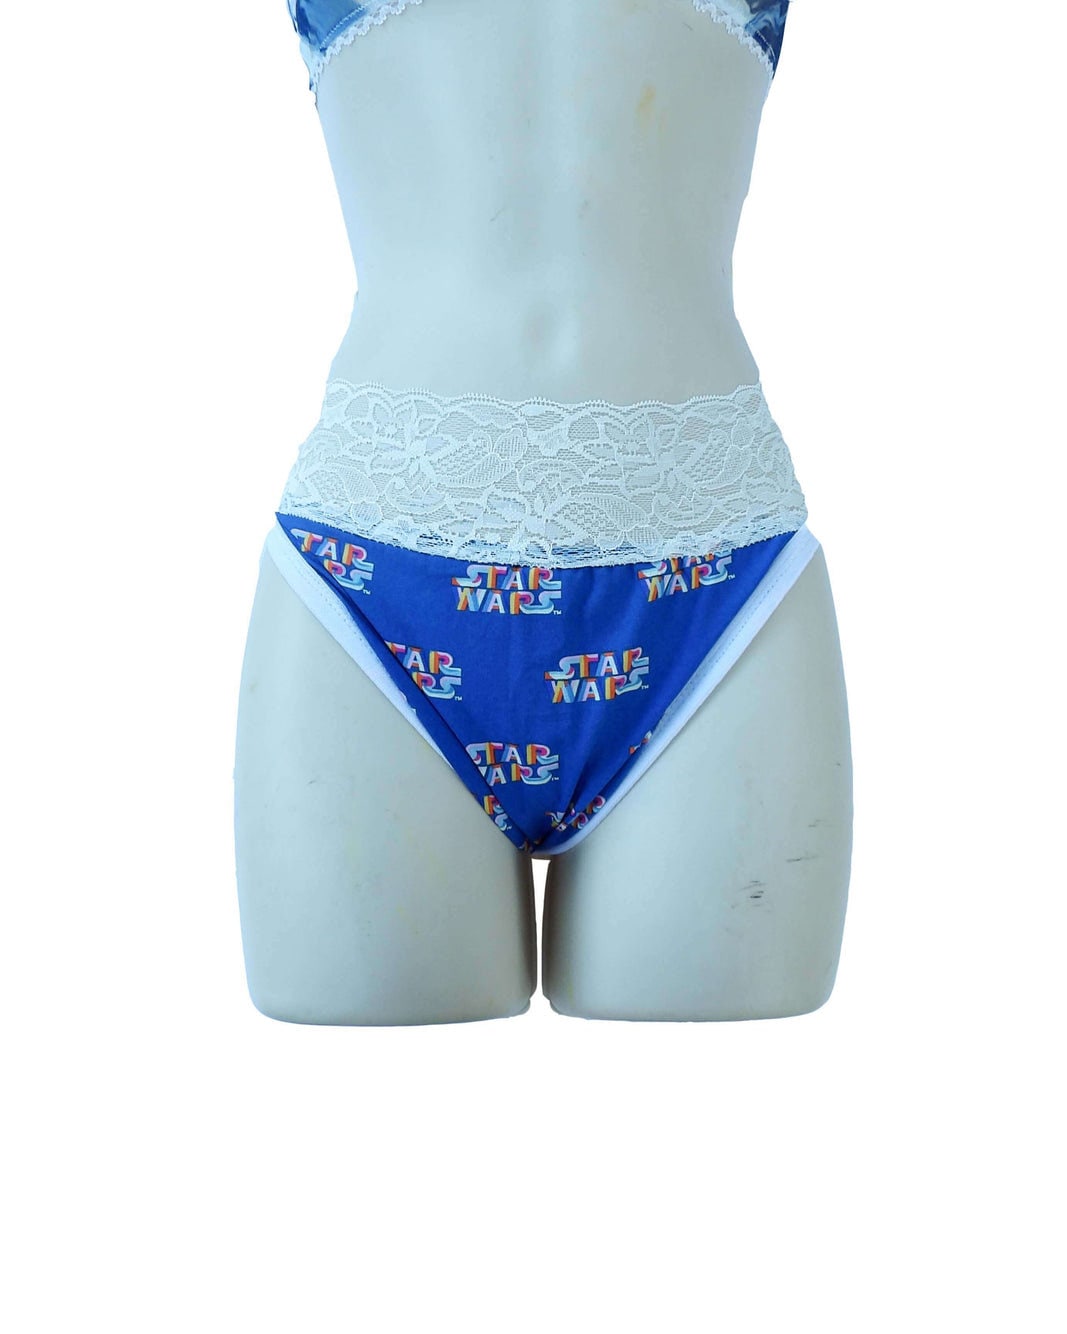 Rainbow Star Wars on Blue and White Lace Gstring Thong 